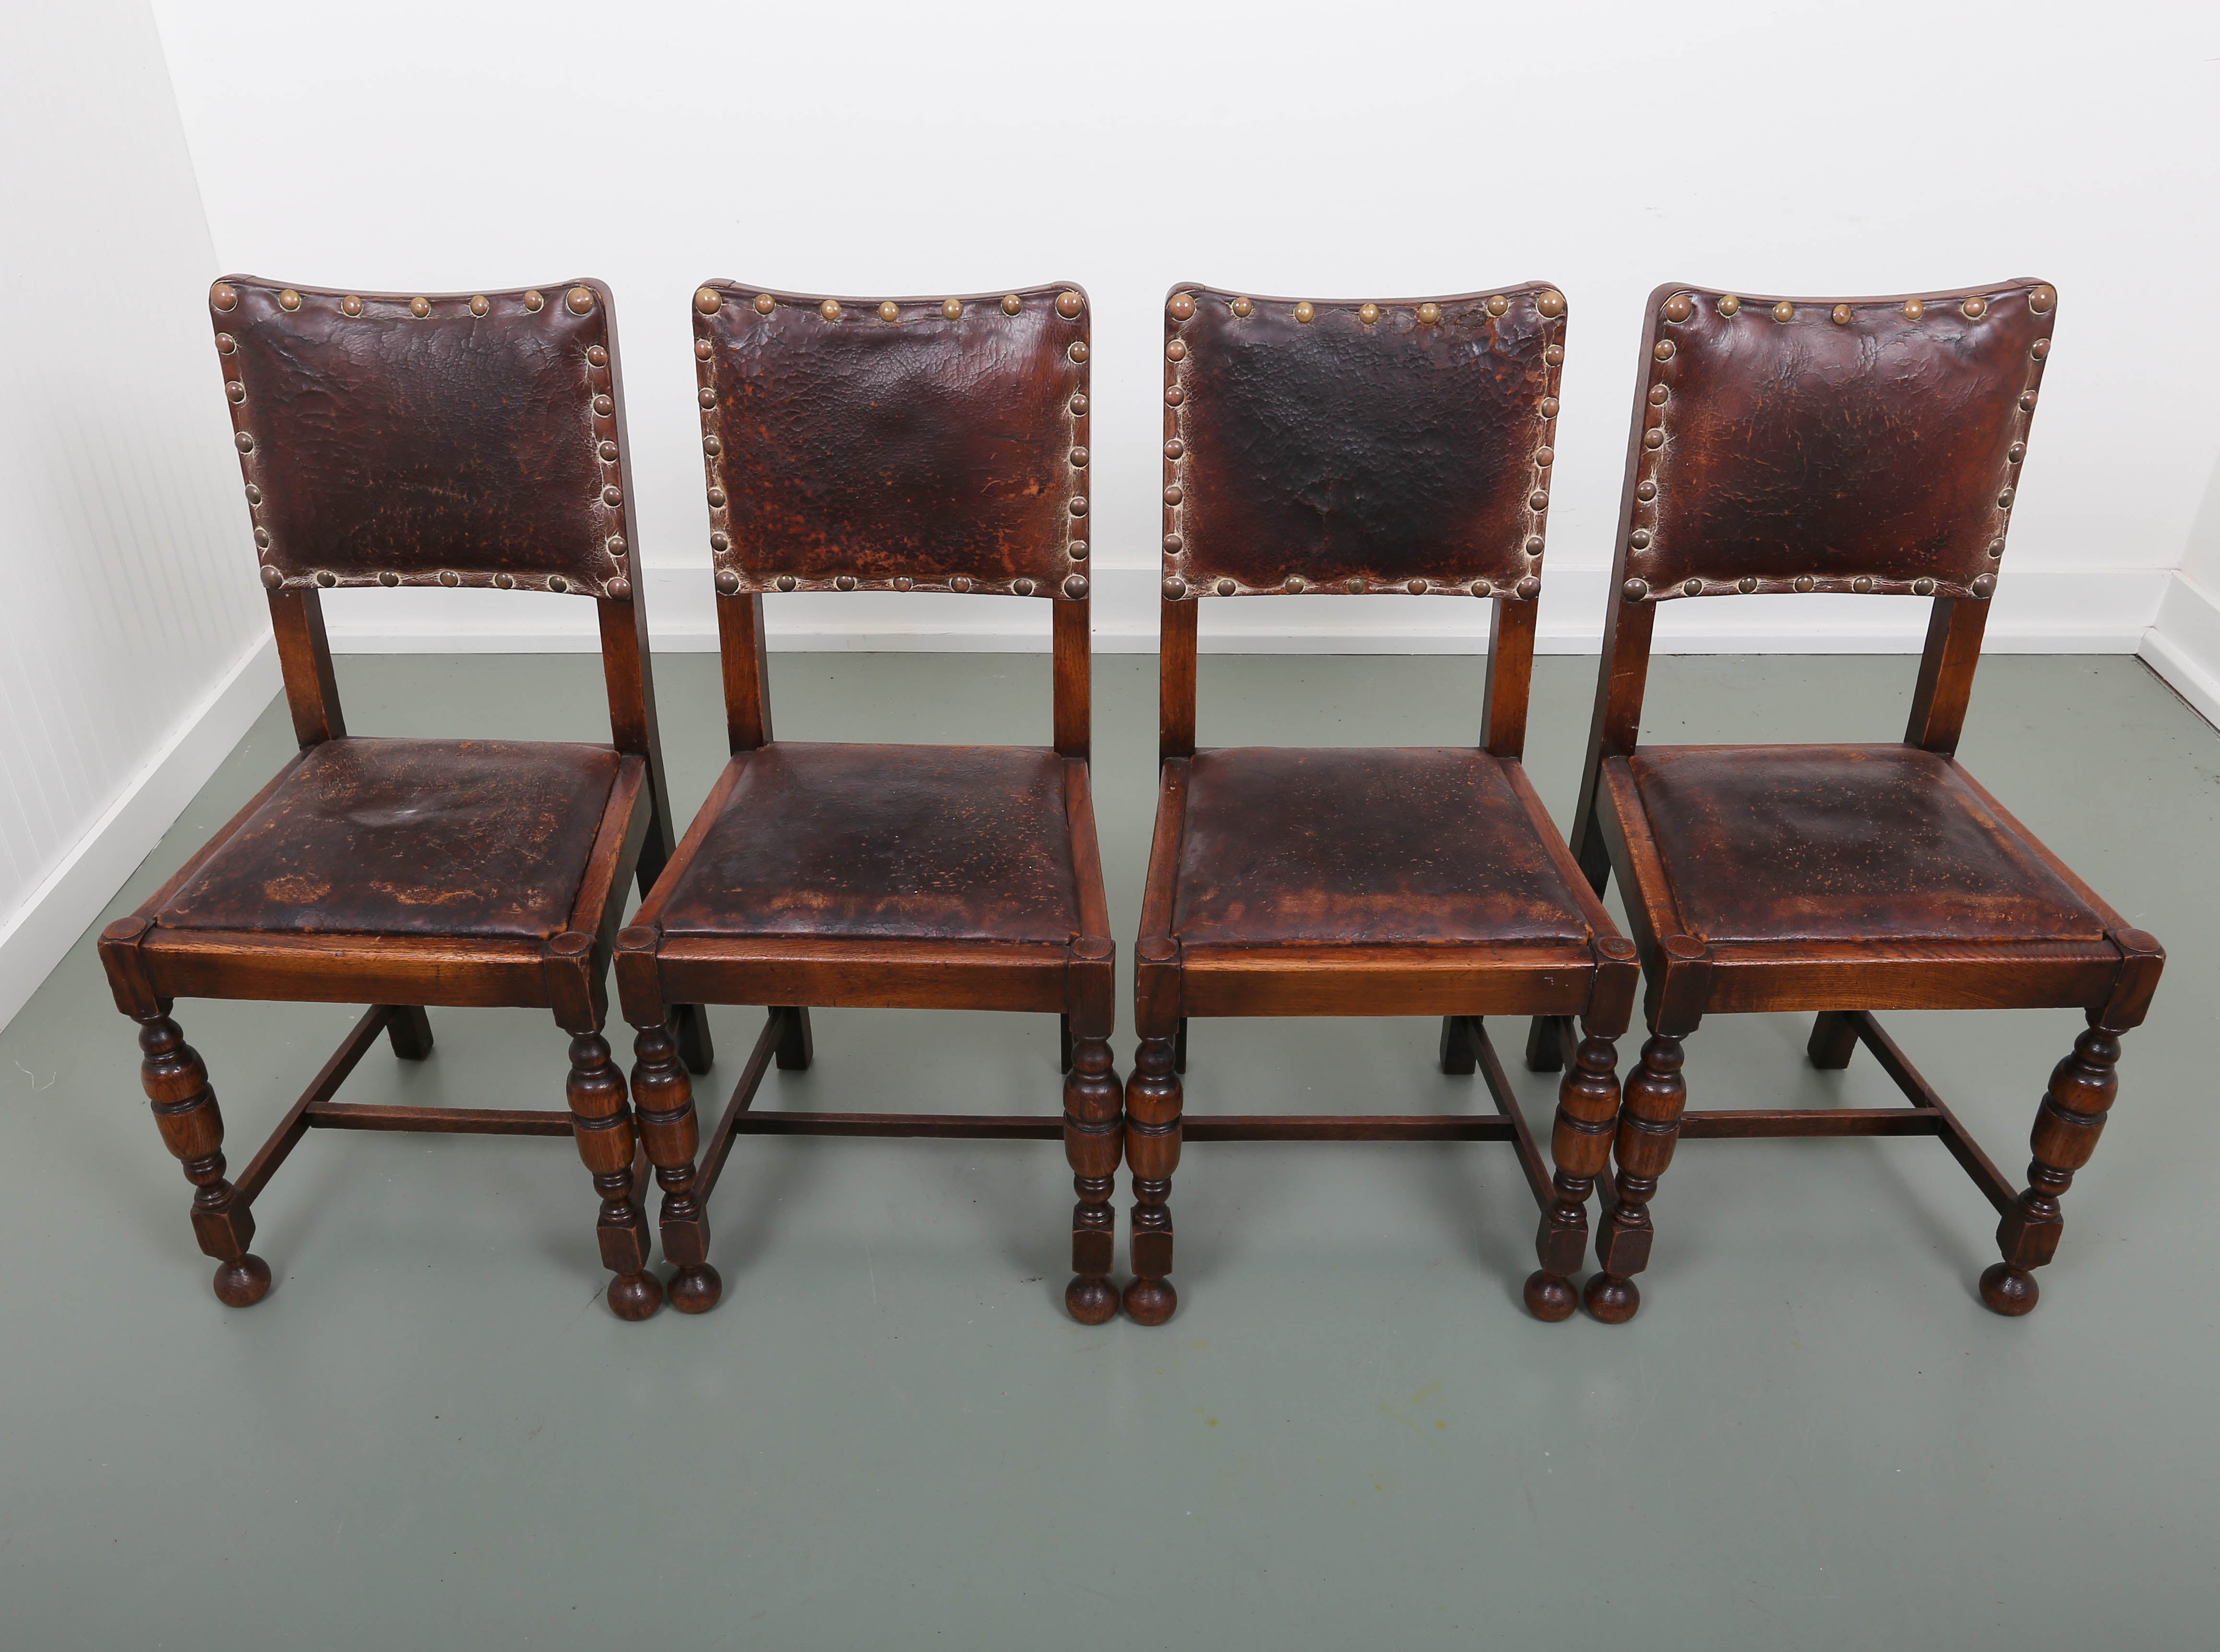 19th Century Set of Four English Oakwood Dining Chairs with Leather In Good Condition For Sale In Southampton, NY